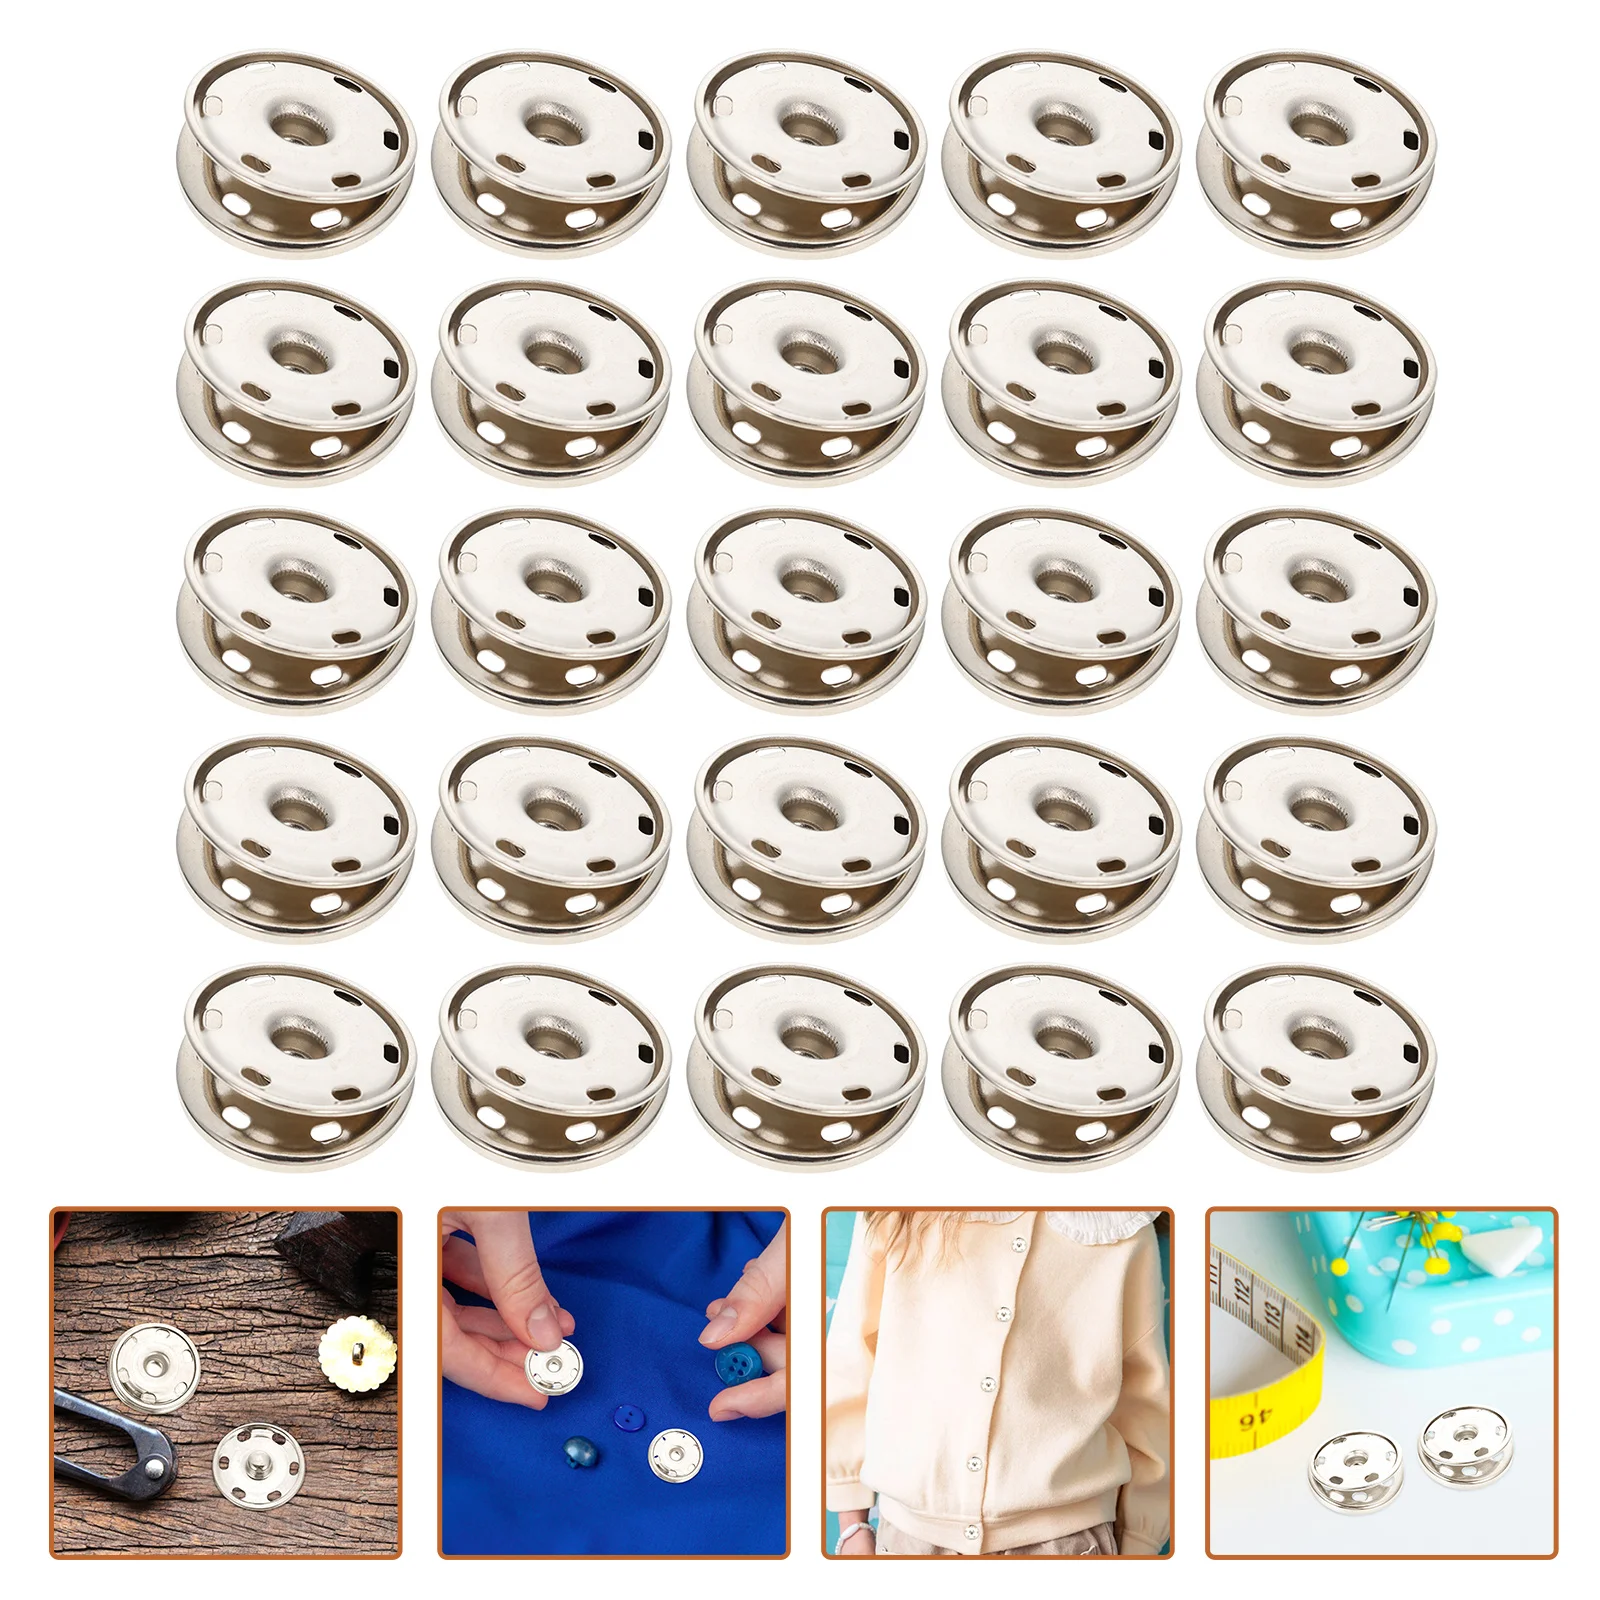 

Snap Buttons Button Snaps Sewing Fasteners Sew Metal Clothing Press Clasp Fastener Clothes Diy Clasps Closure Kit Fabric Purses